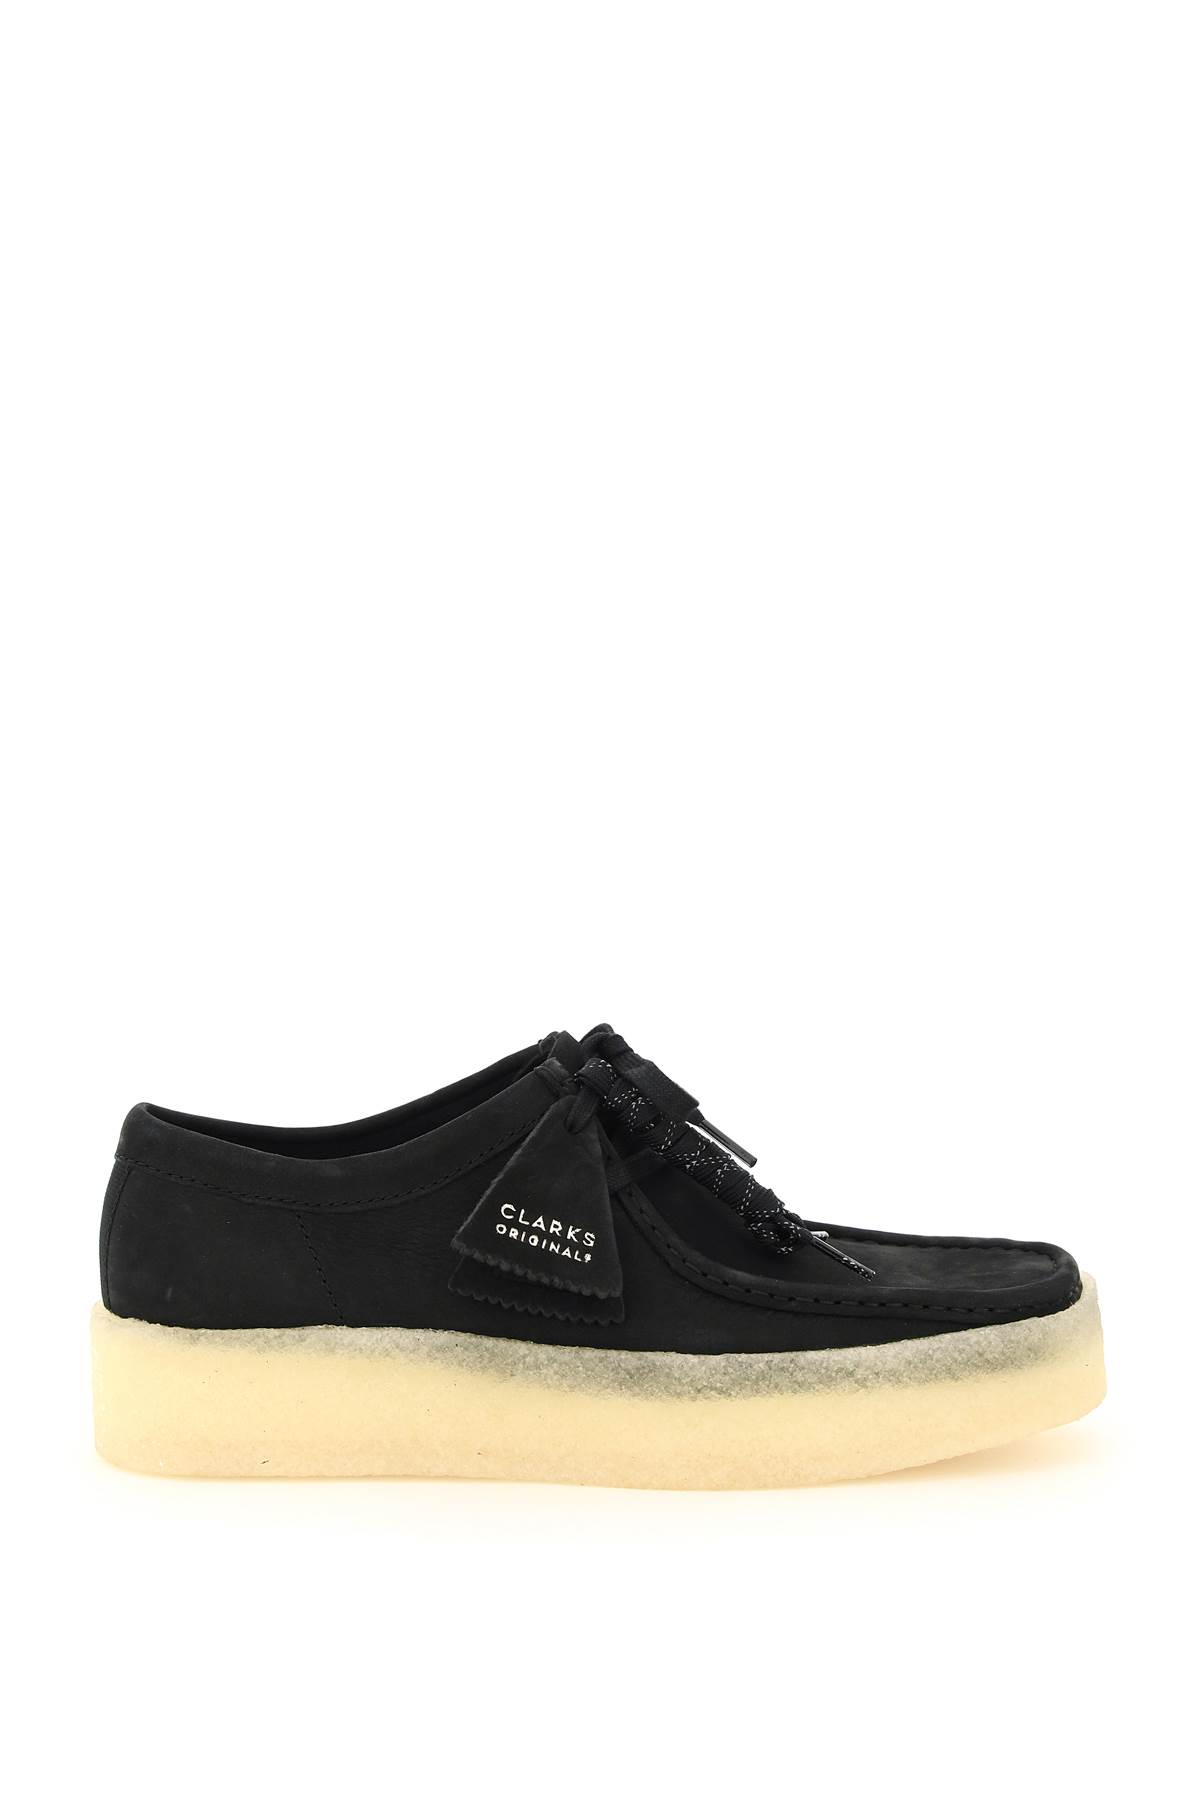 Clarks Wallabee Cup Lace-up Shoes